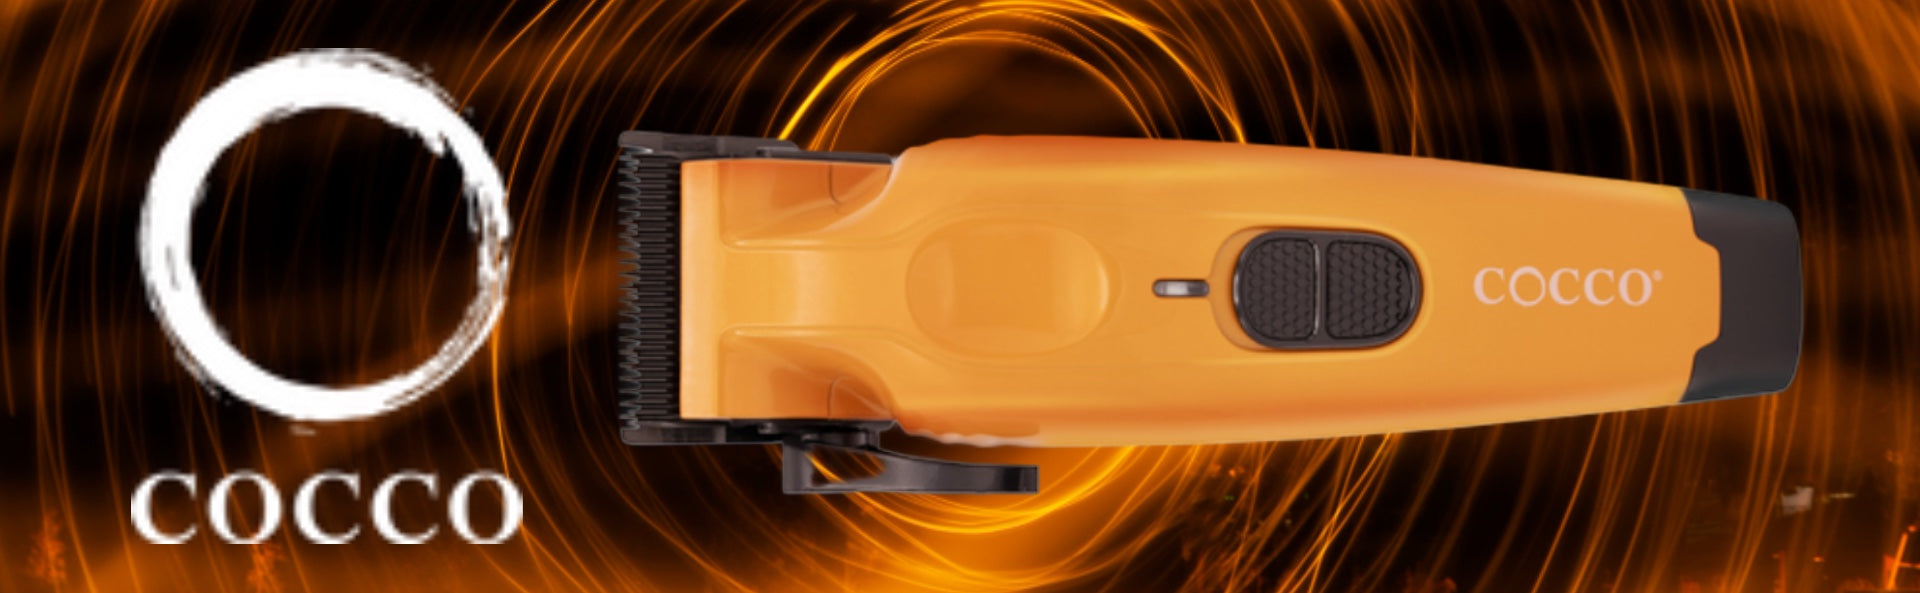 Cocco Hyper Veloce Pro Clipper in Bold Orange with High-Torque Motor and Graphene Taper Blade